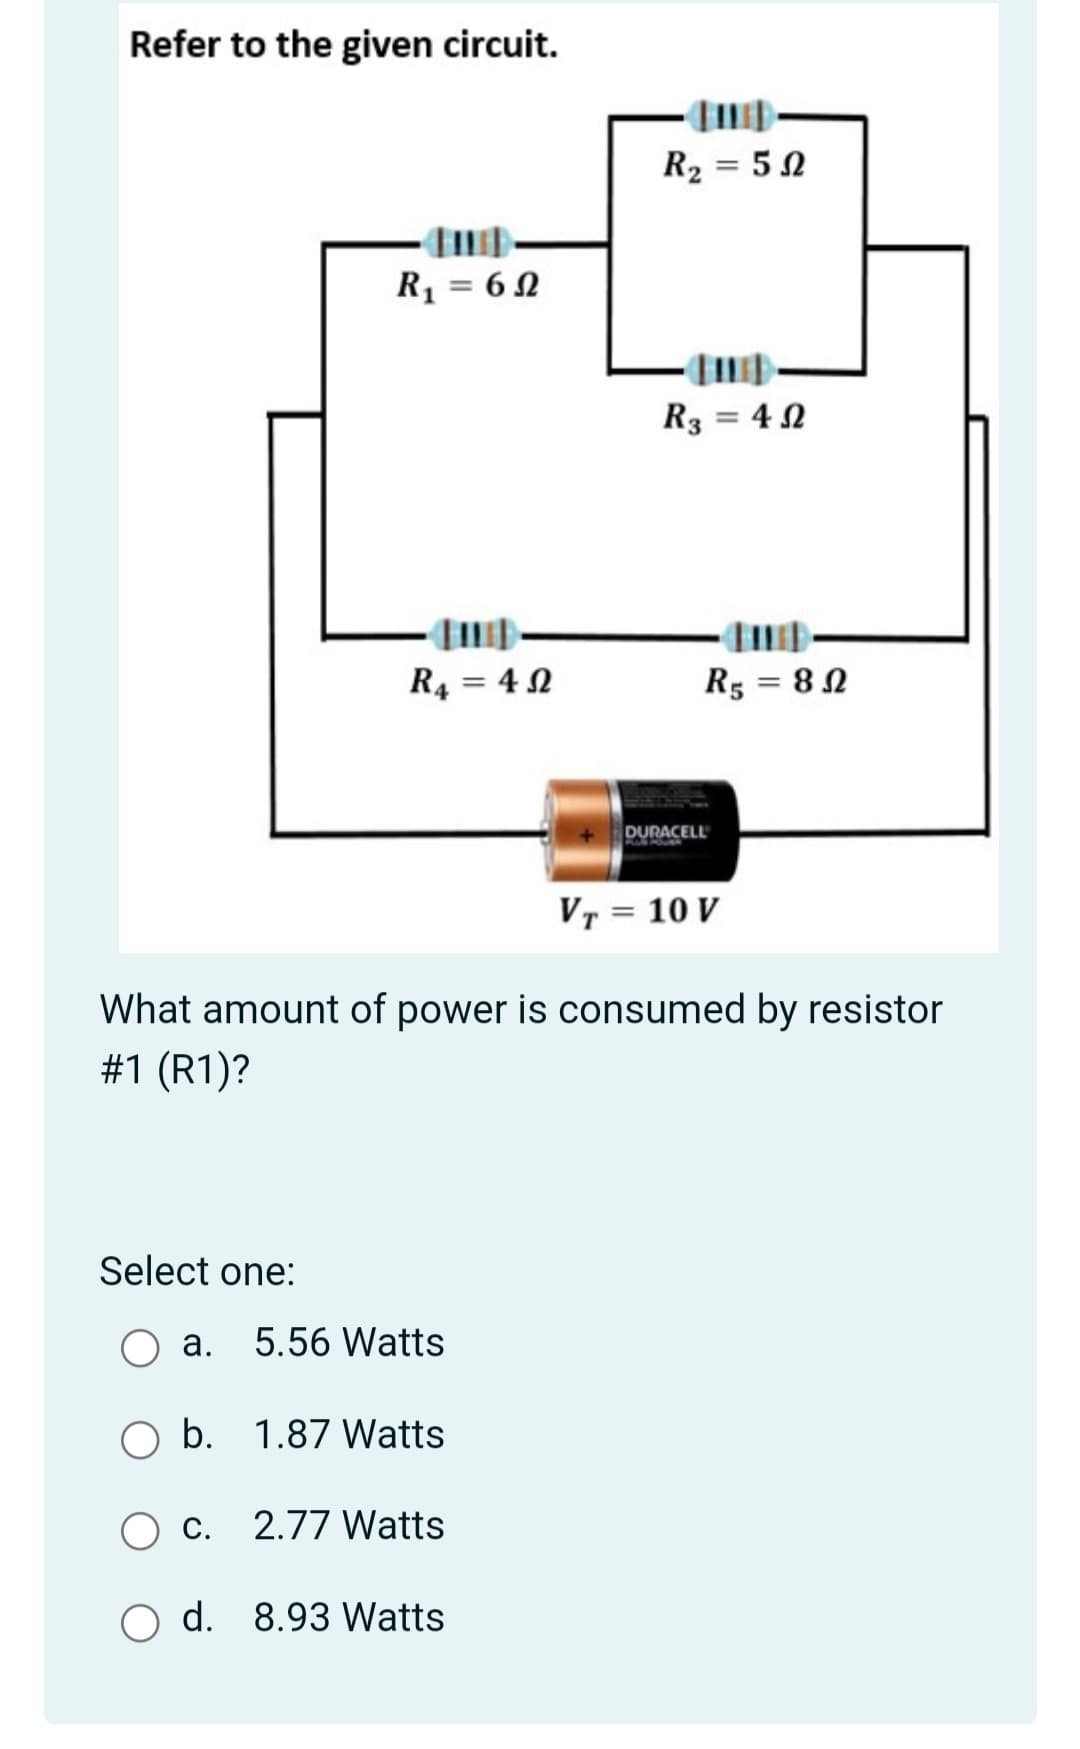 Refer to the given circuit.
R2 = 5 N
R1 = 6 N
R3 = 4 N
R4 = 4 2
R5 = 8N
%3D
DURACELL
VT = 10 V
What amount of power is consumed by resistor
#1 (R1)?
Select one:
а.
5.56 Watts
b. 1.87 Watts
c. 2.77 Watts
O d. 8.93 Watts
